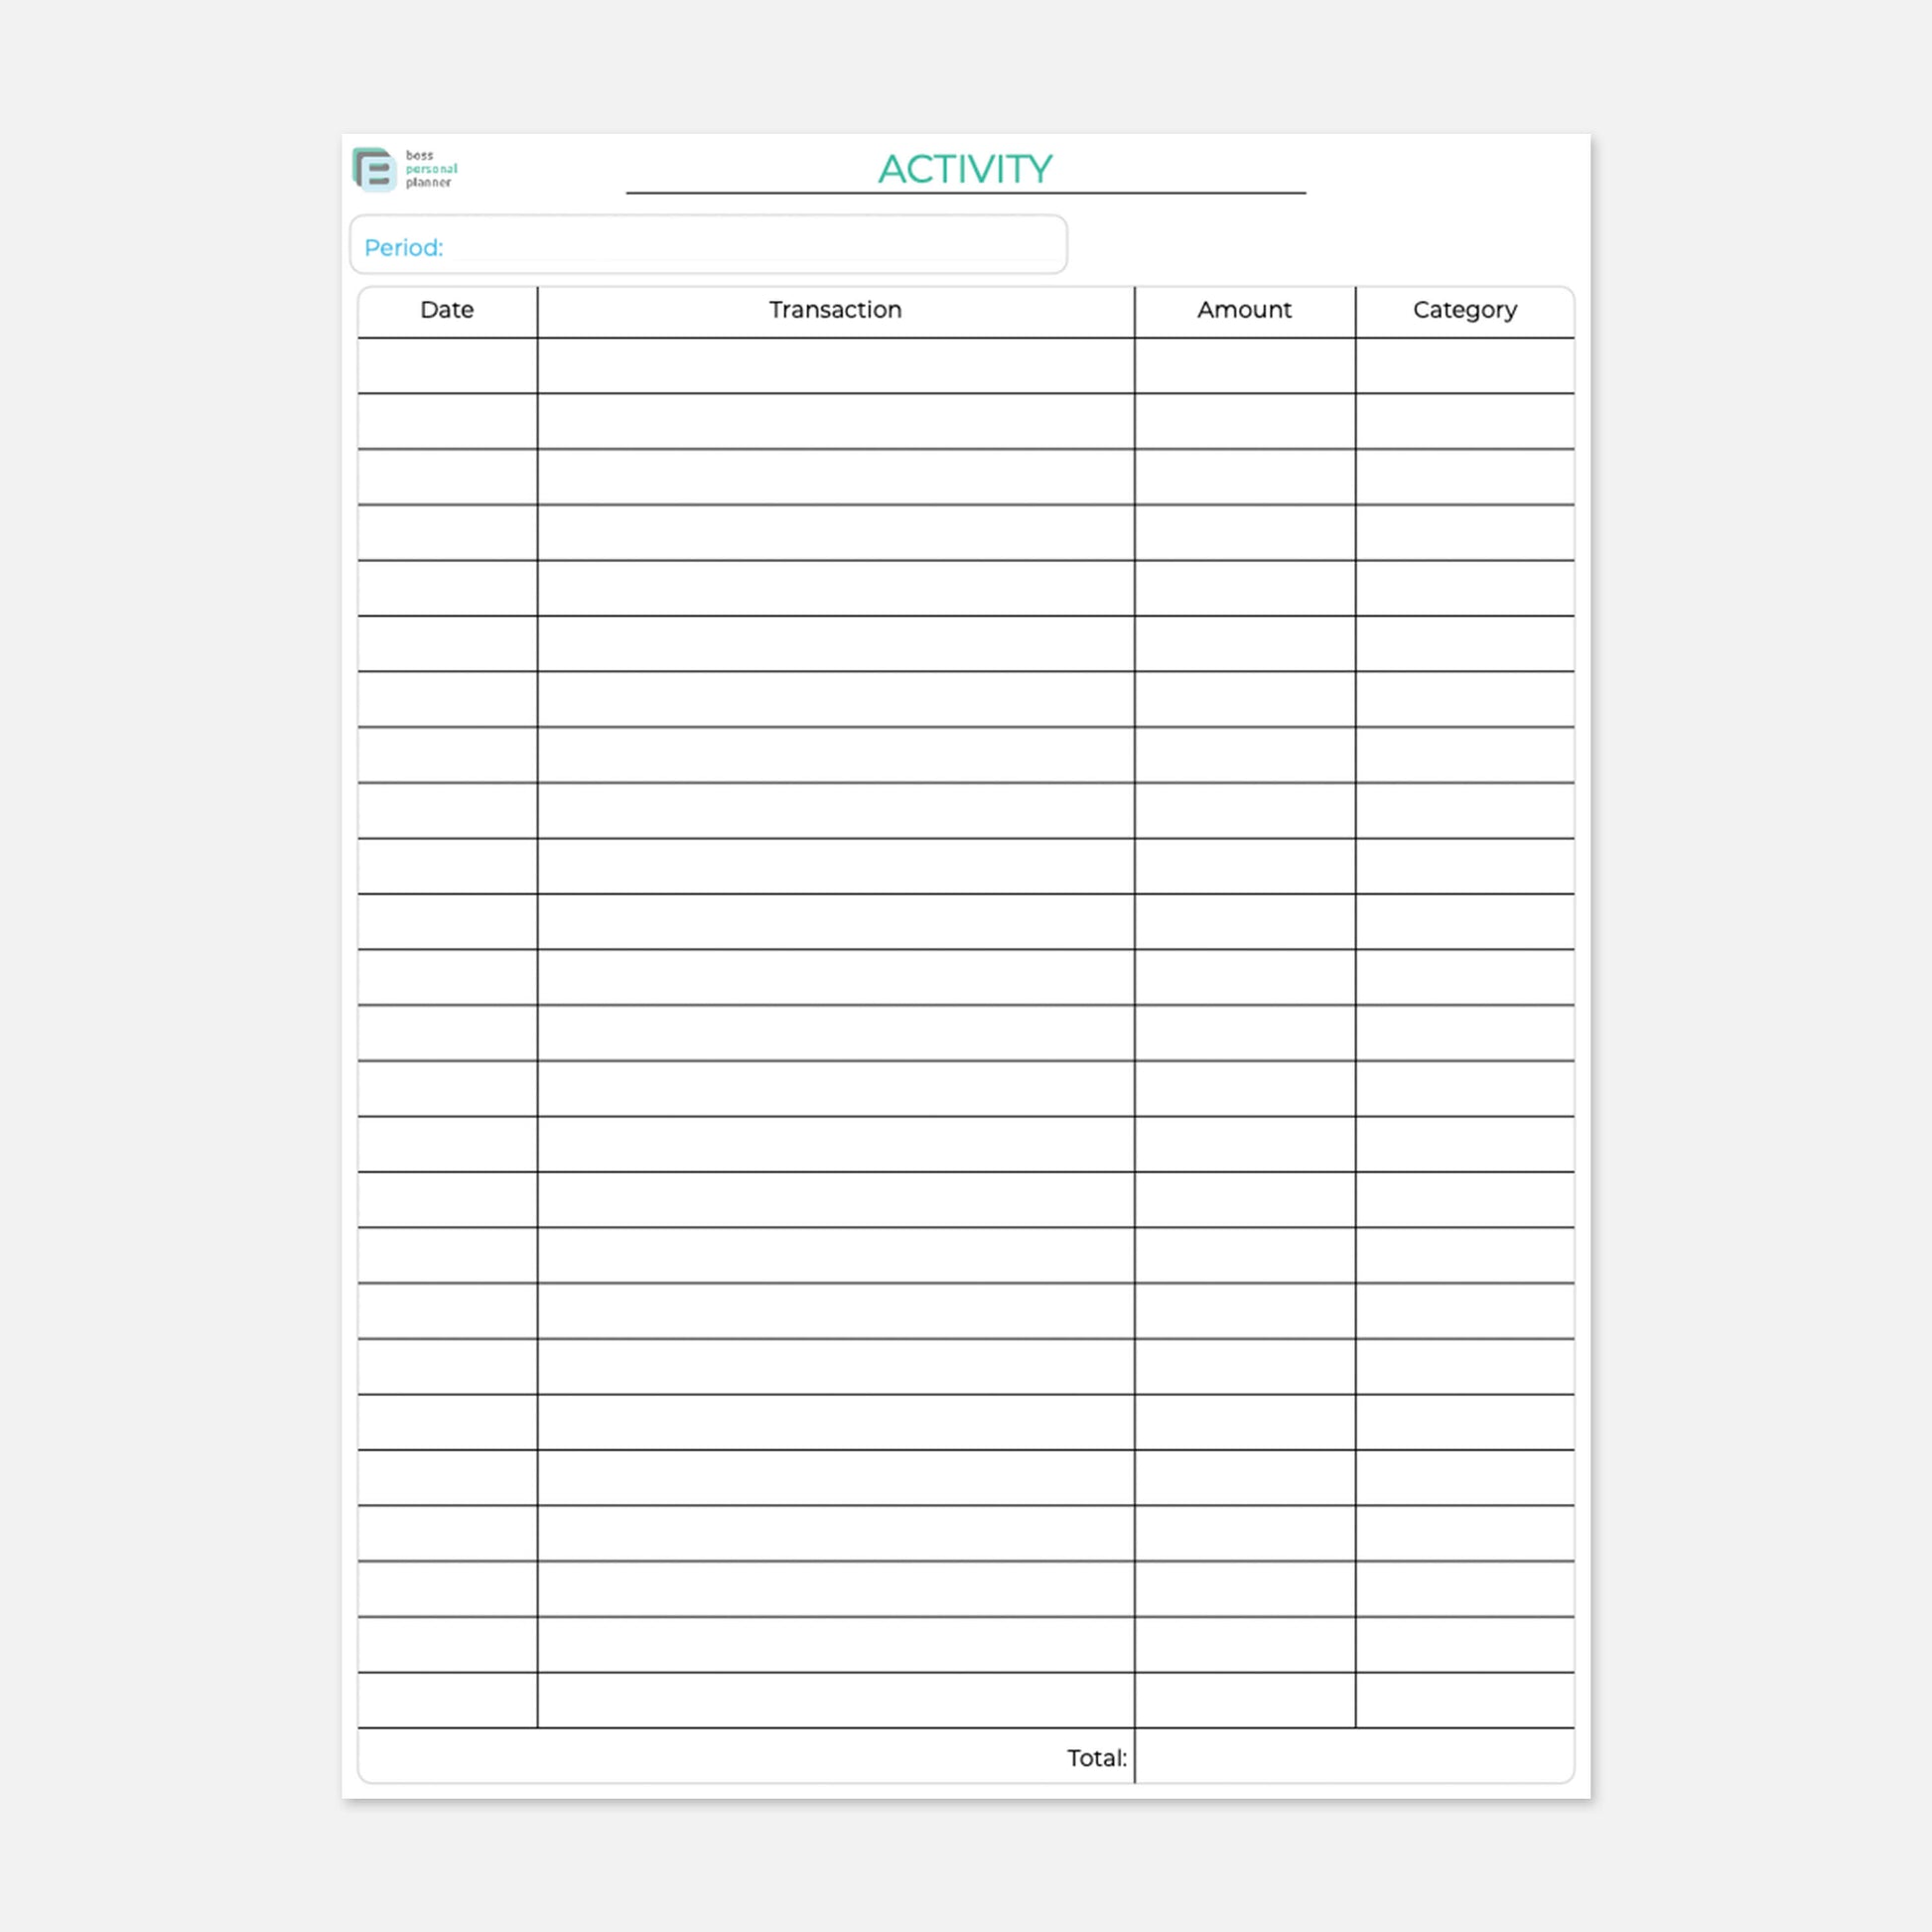 Printable Monthly Budget Planner